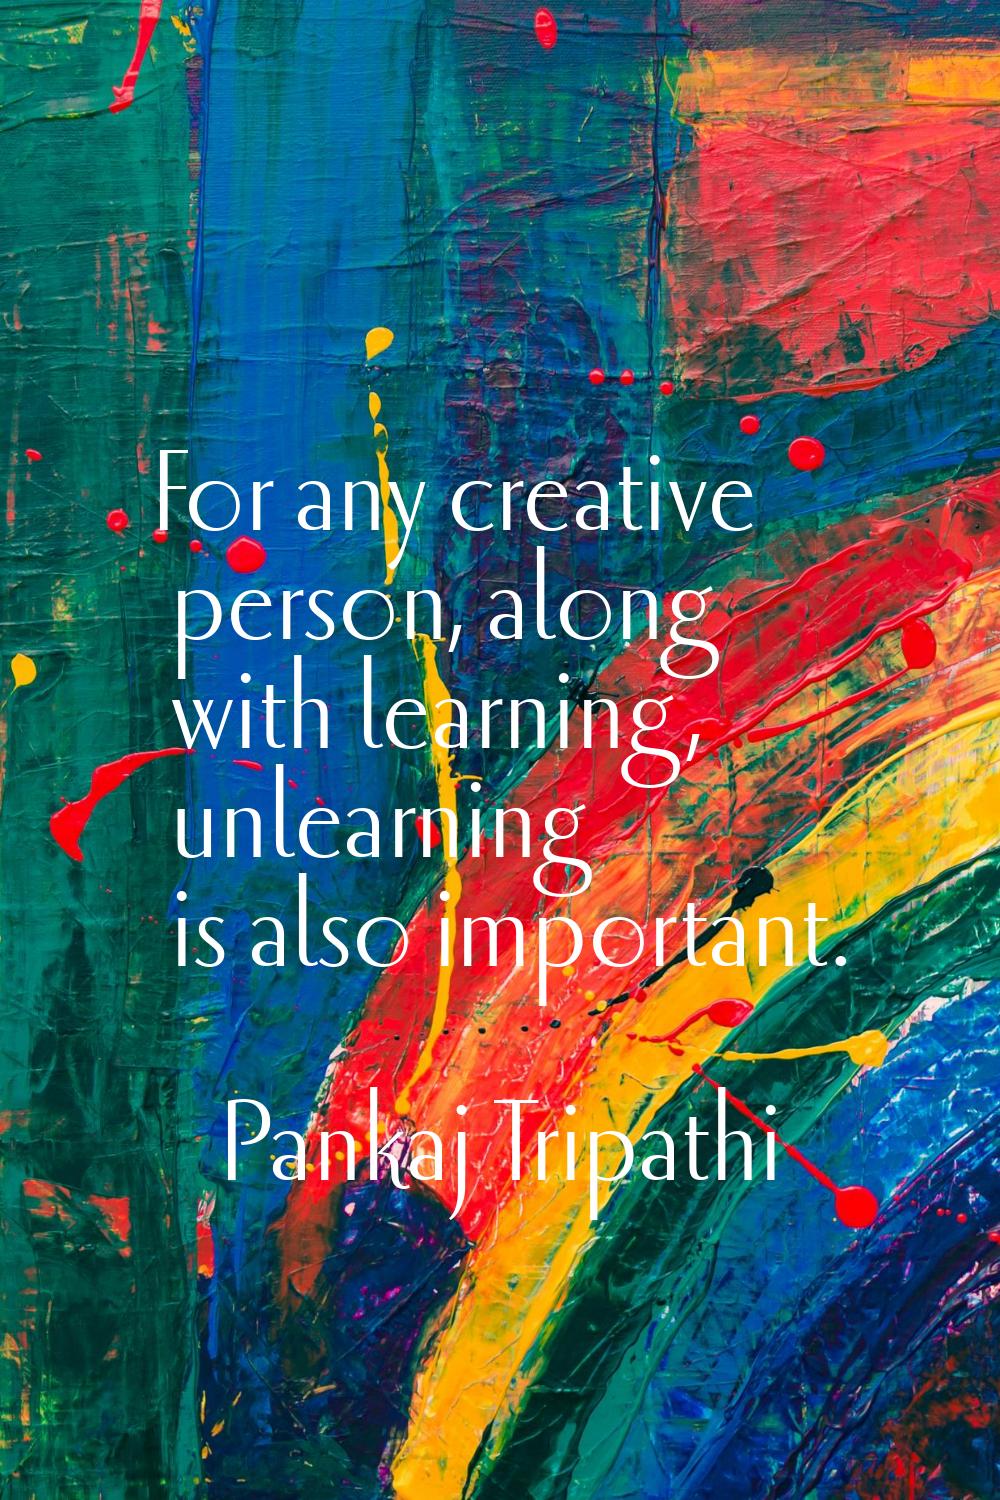 For any creative person, along with learning, unlearning is also important.